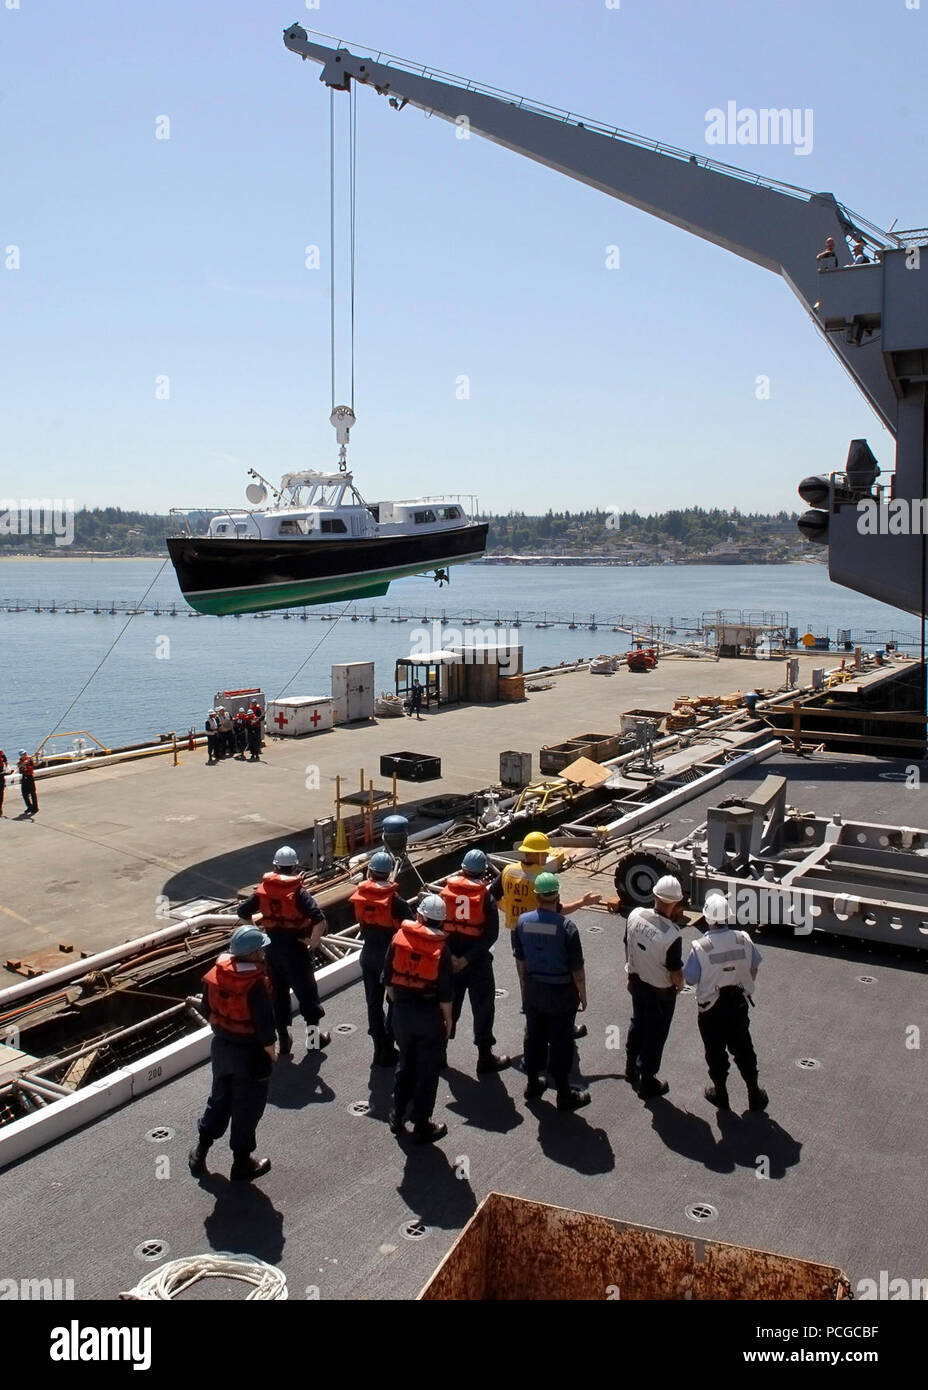 Members of deck department work to bring the Commander, Carrier Strike Group 9, admiral's barge aboard Nimitz-class aircraft carrier USS Abraham Lincoln (CVN 72). Lincoln is conducting training, crew certification, and preparation for the ship's return to operational status following a shipyard availability period. Stock Photo